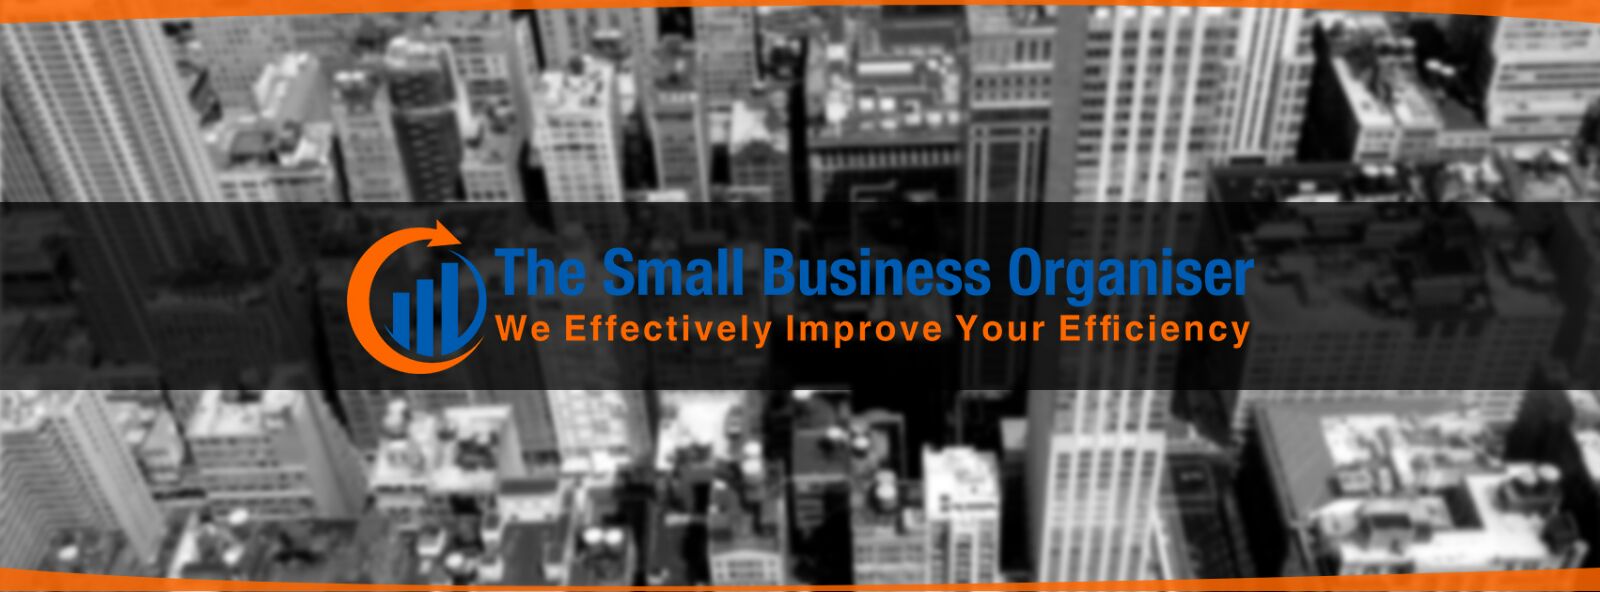 The Small Business Organiser